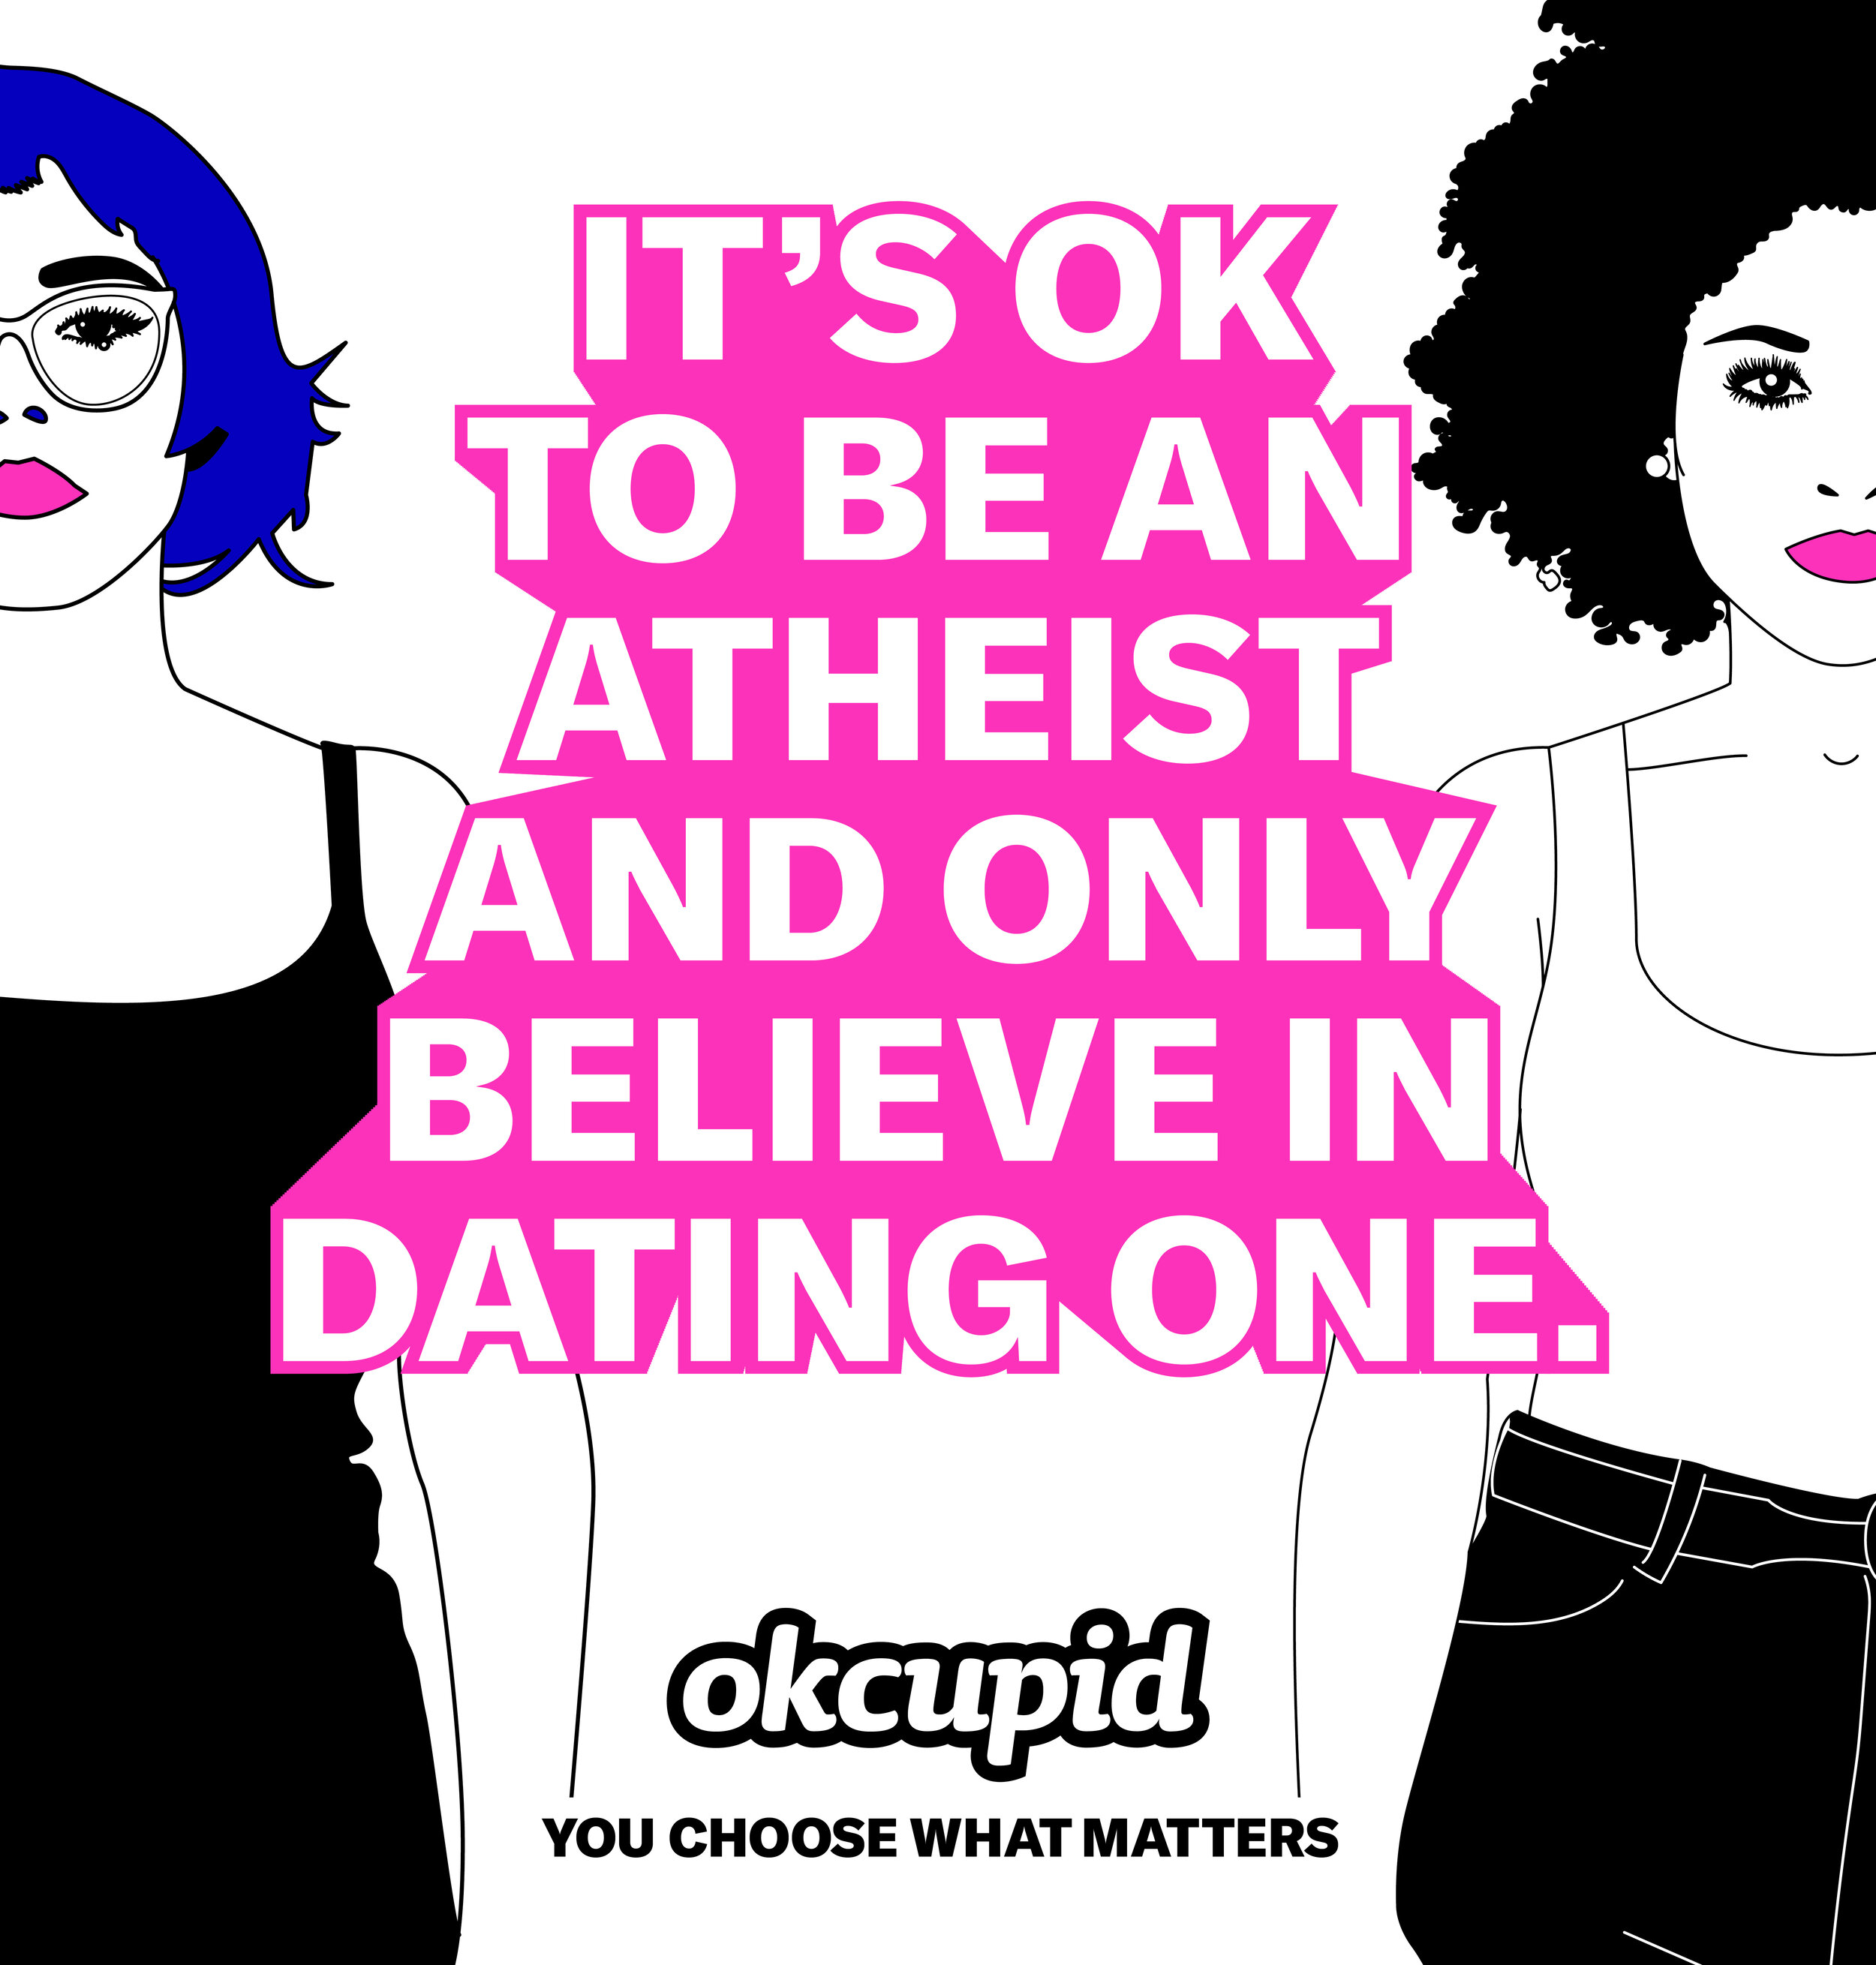 it's ok to be an atheist and only believe in dating one